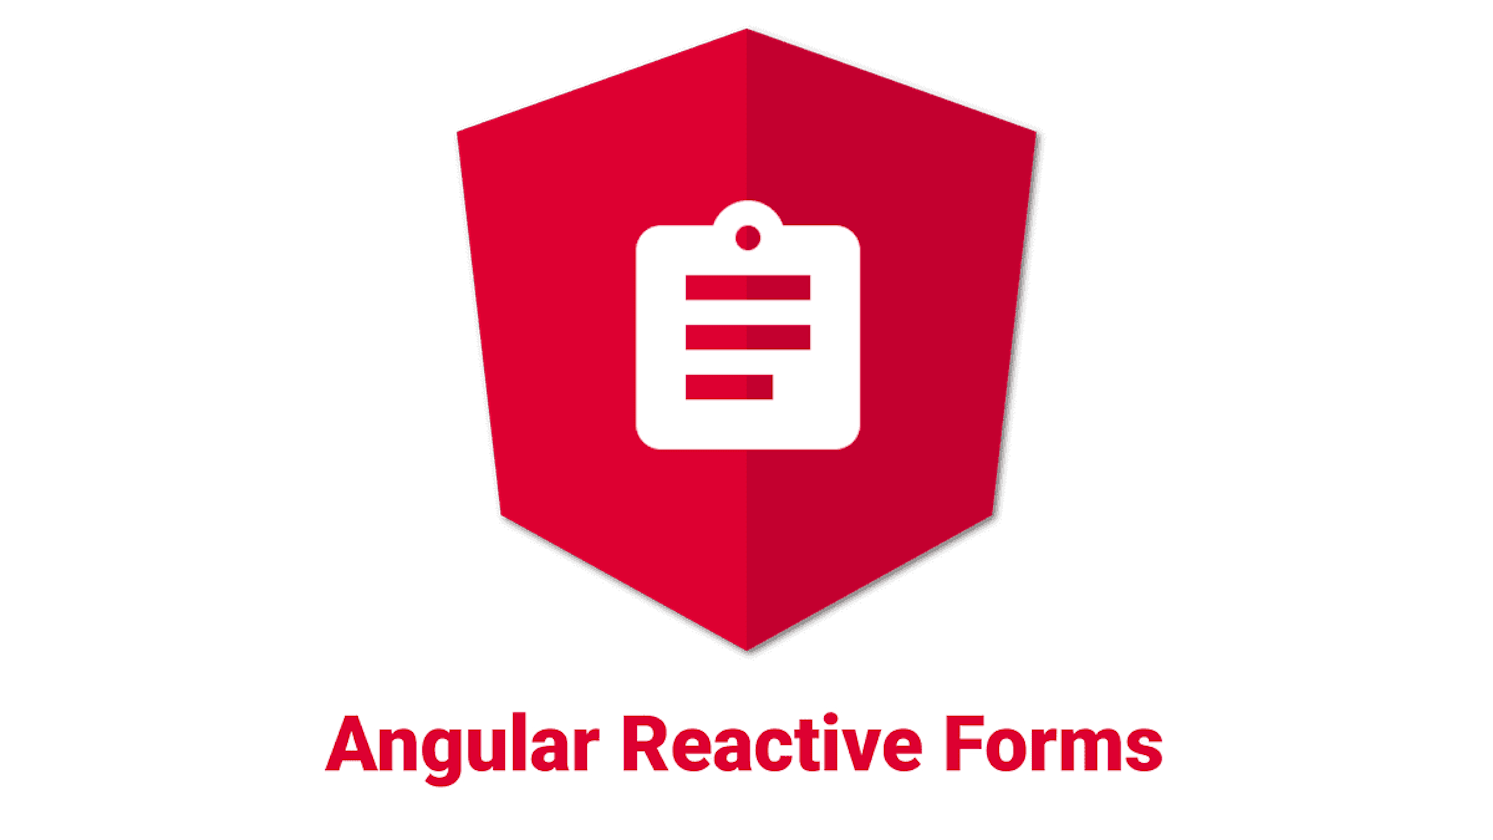 Revolutionize Your Angular Forms: Mastering Custom Inputs with and without Reactive Form Control